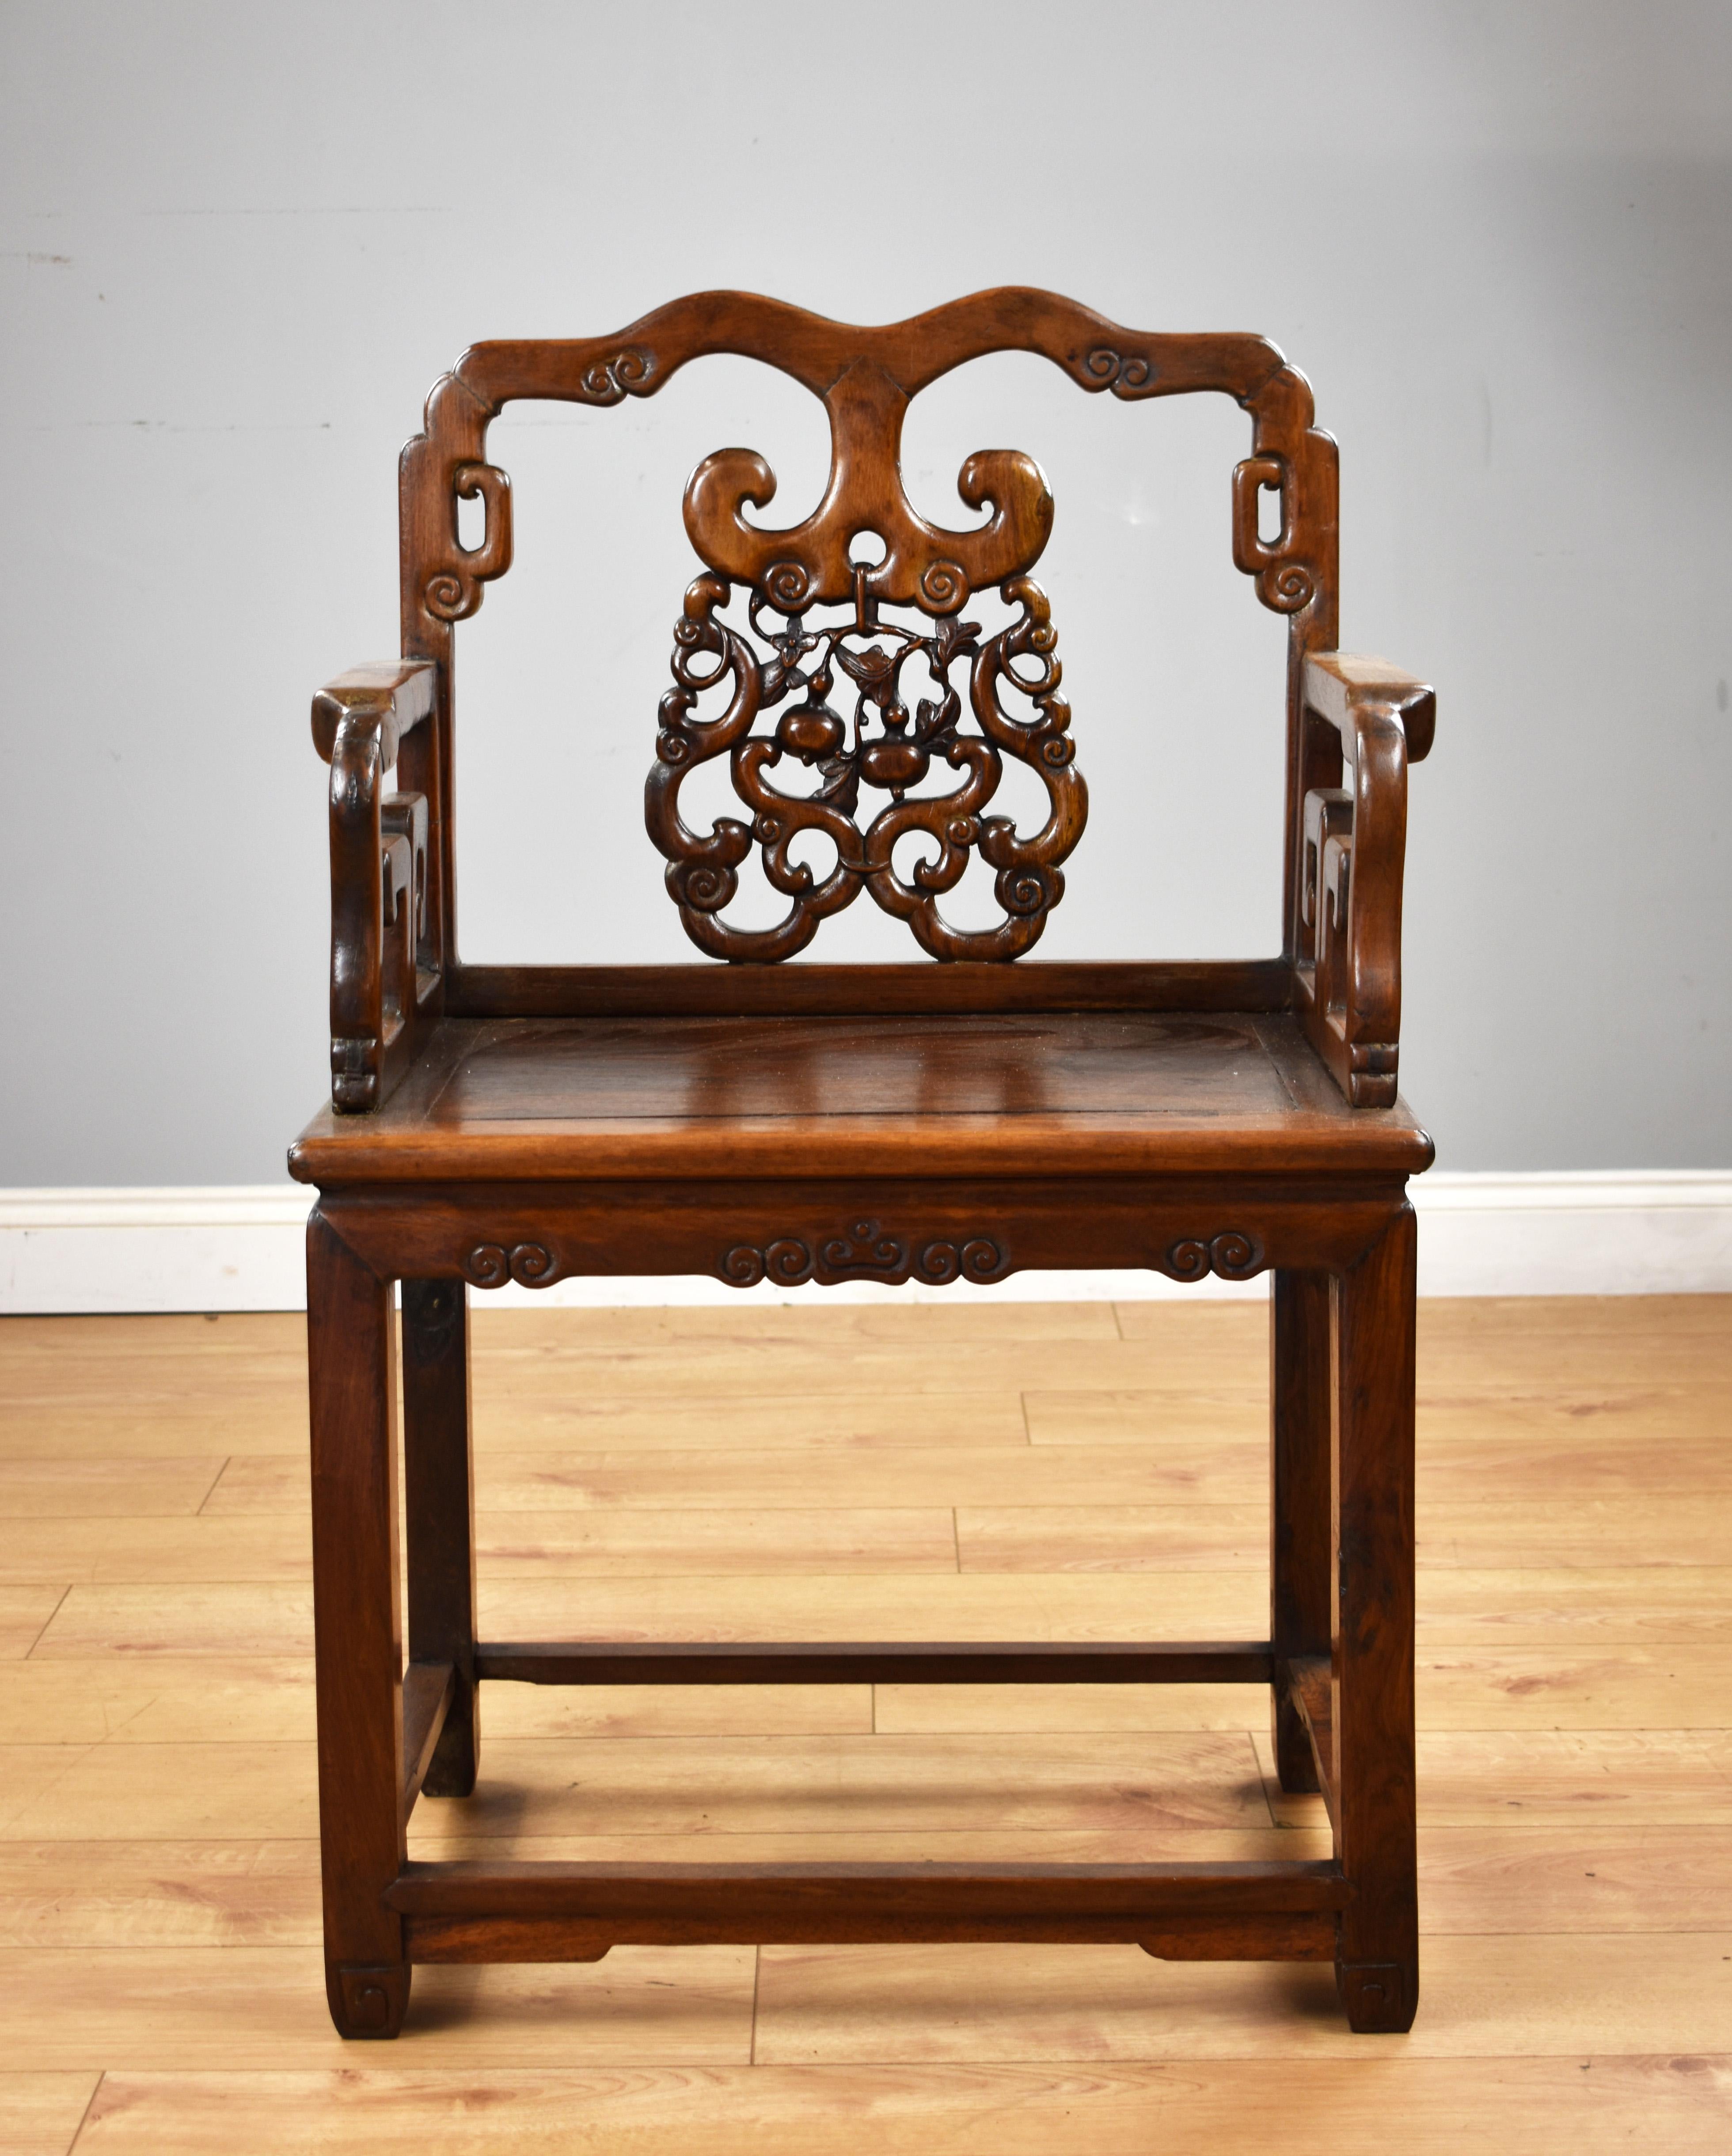 For sale is a good quality oriental armchair, having an ornately carved back, square seat above a square stretcher base. The chair remains in very good condition being structurally sound and having a nice patina. 

Measures: Width 25.5